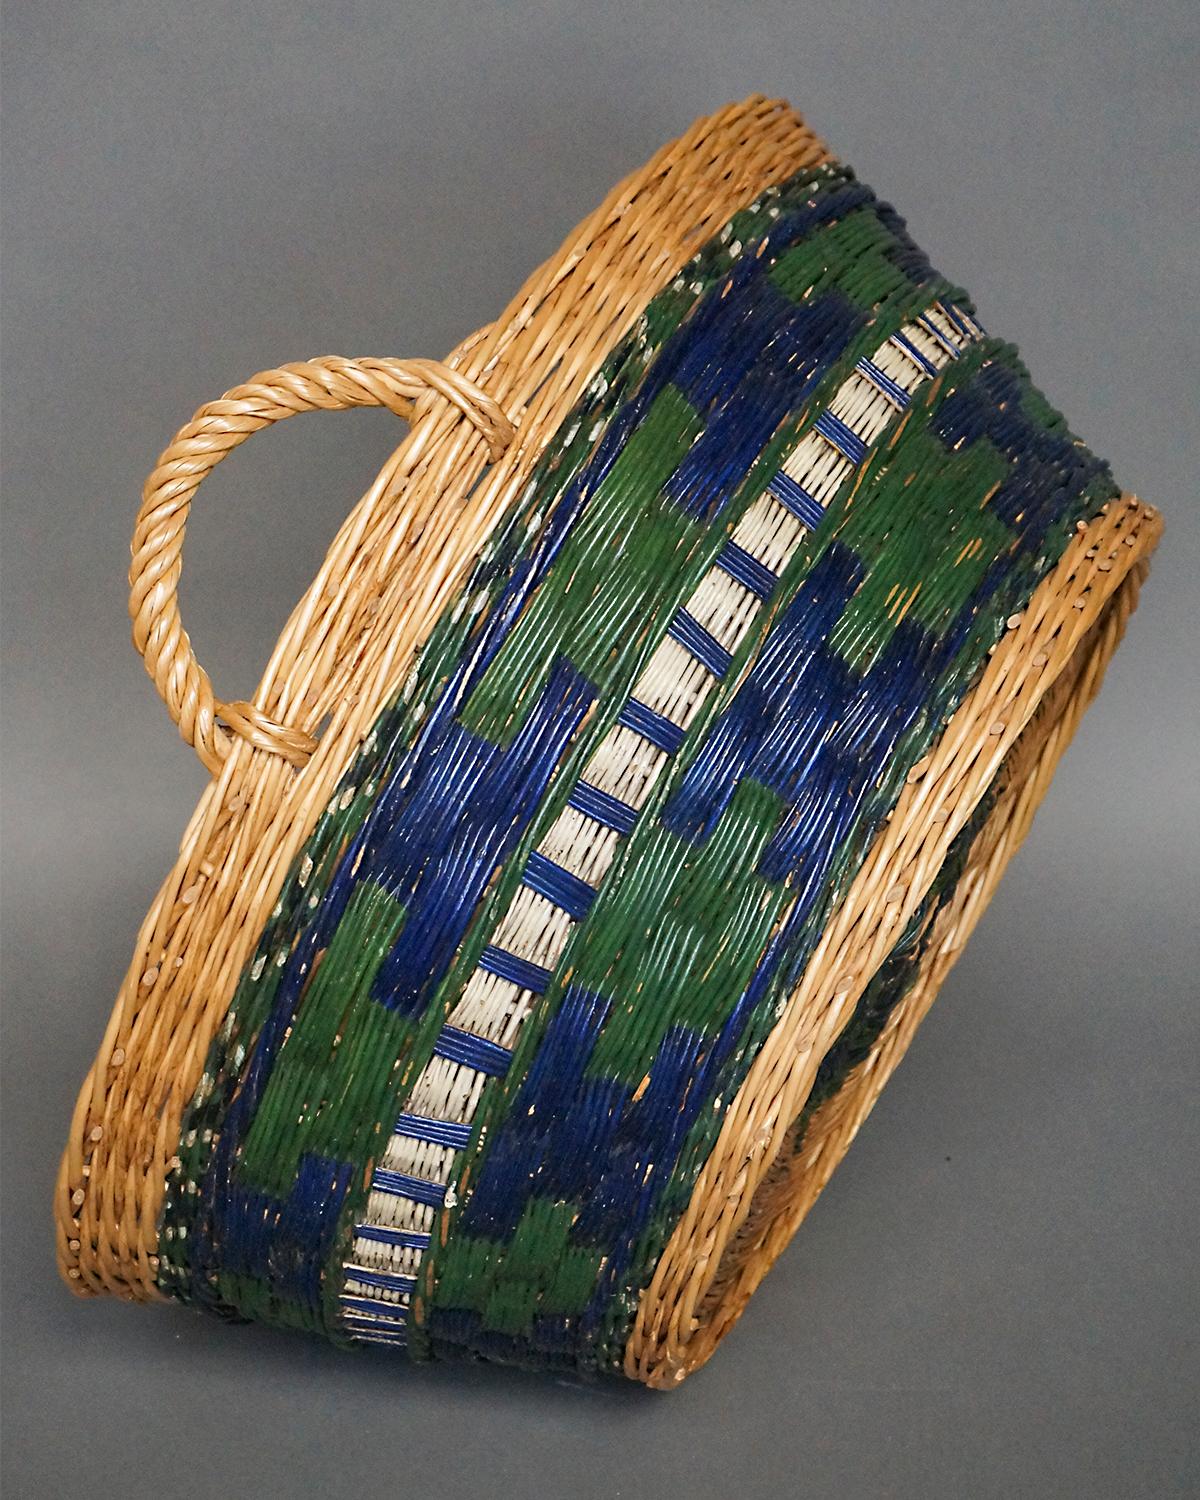 Wedding basket in blue and green paint, Schwalm region, Germany, circa 1870. Handwoven and hand painted, these baskets were gifts to the bride and used in the wedding ceremony to carry her dowry.